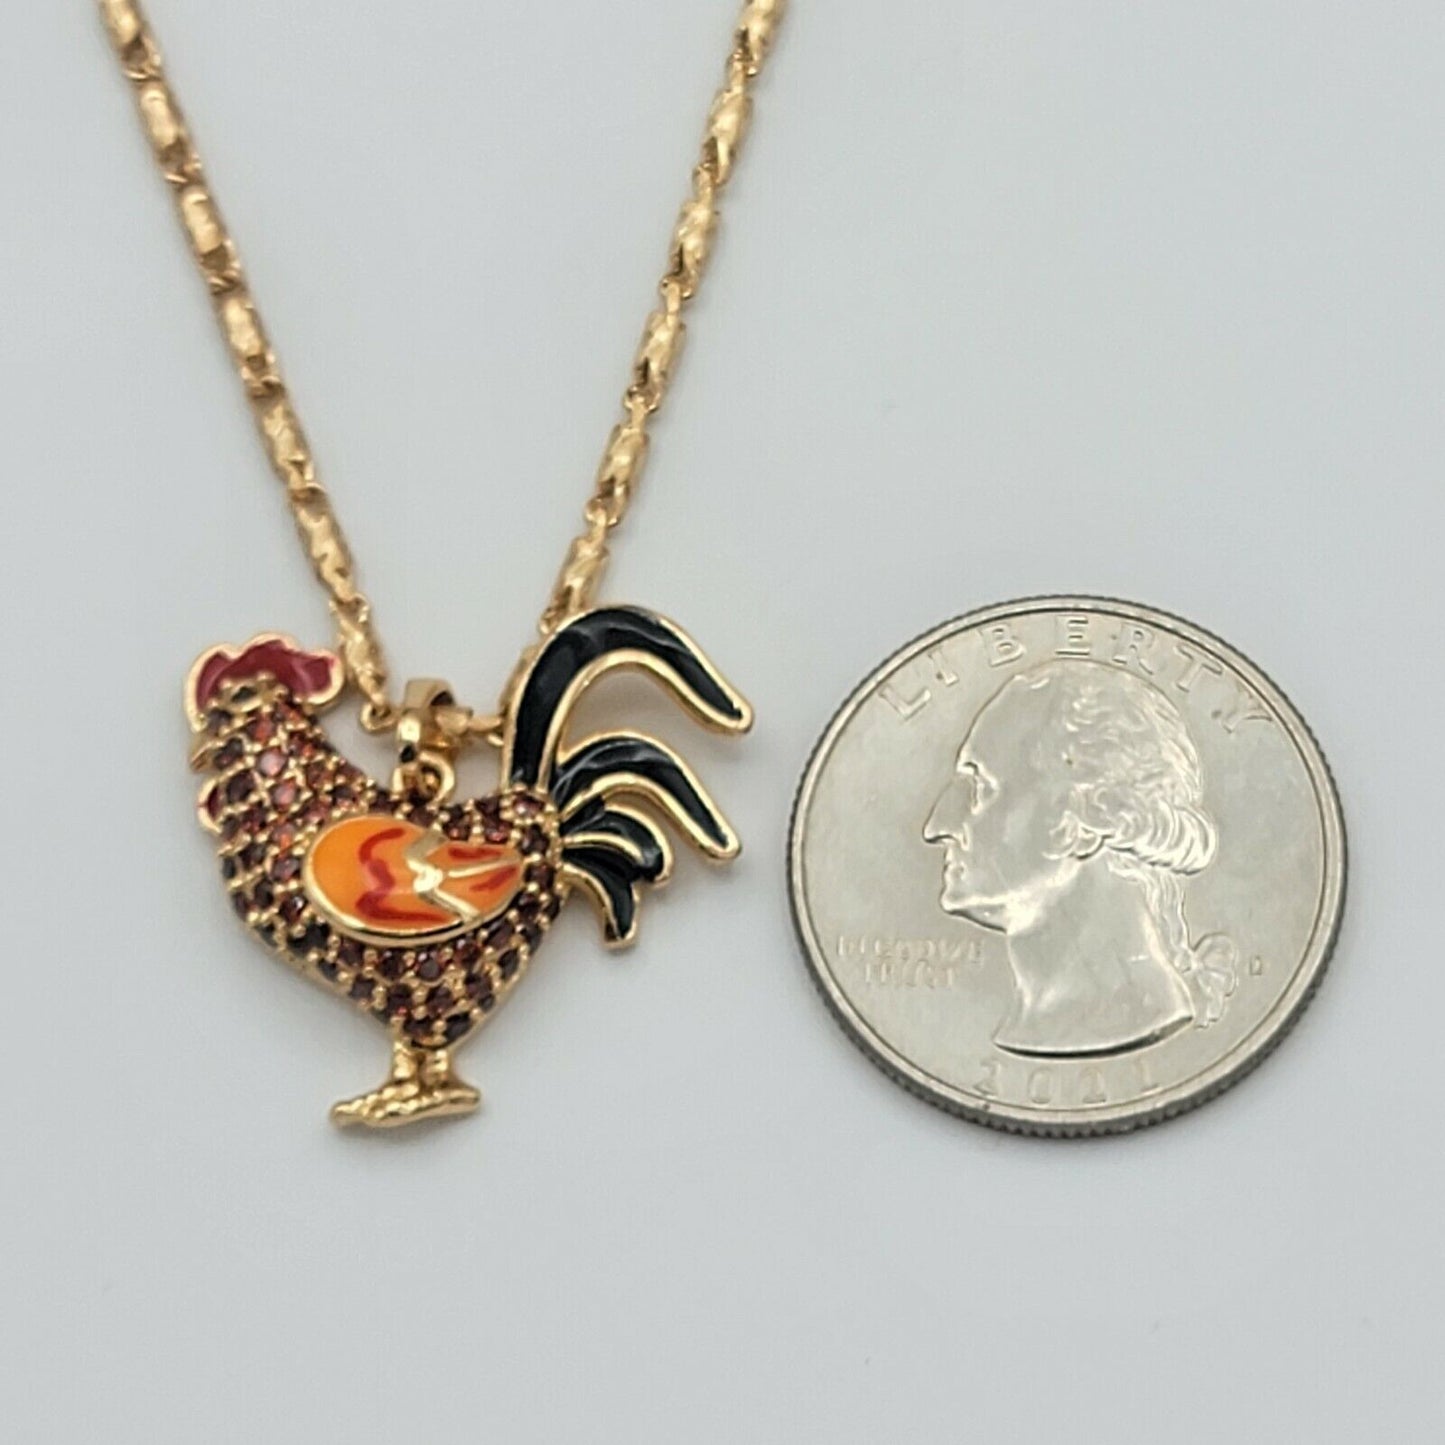 Necklaces - 18k Gold Plated. Multicolor CZ Rooster Pendant & Chain.